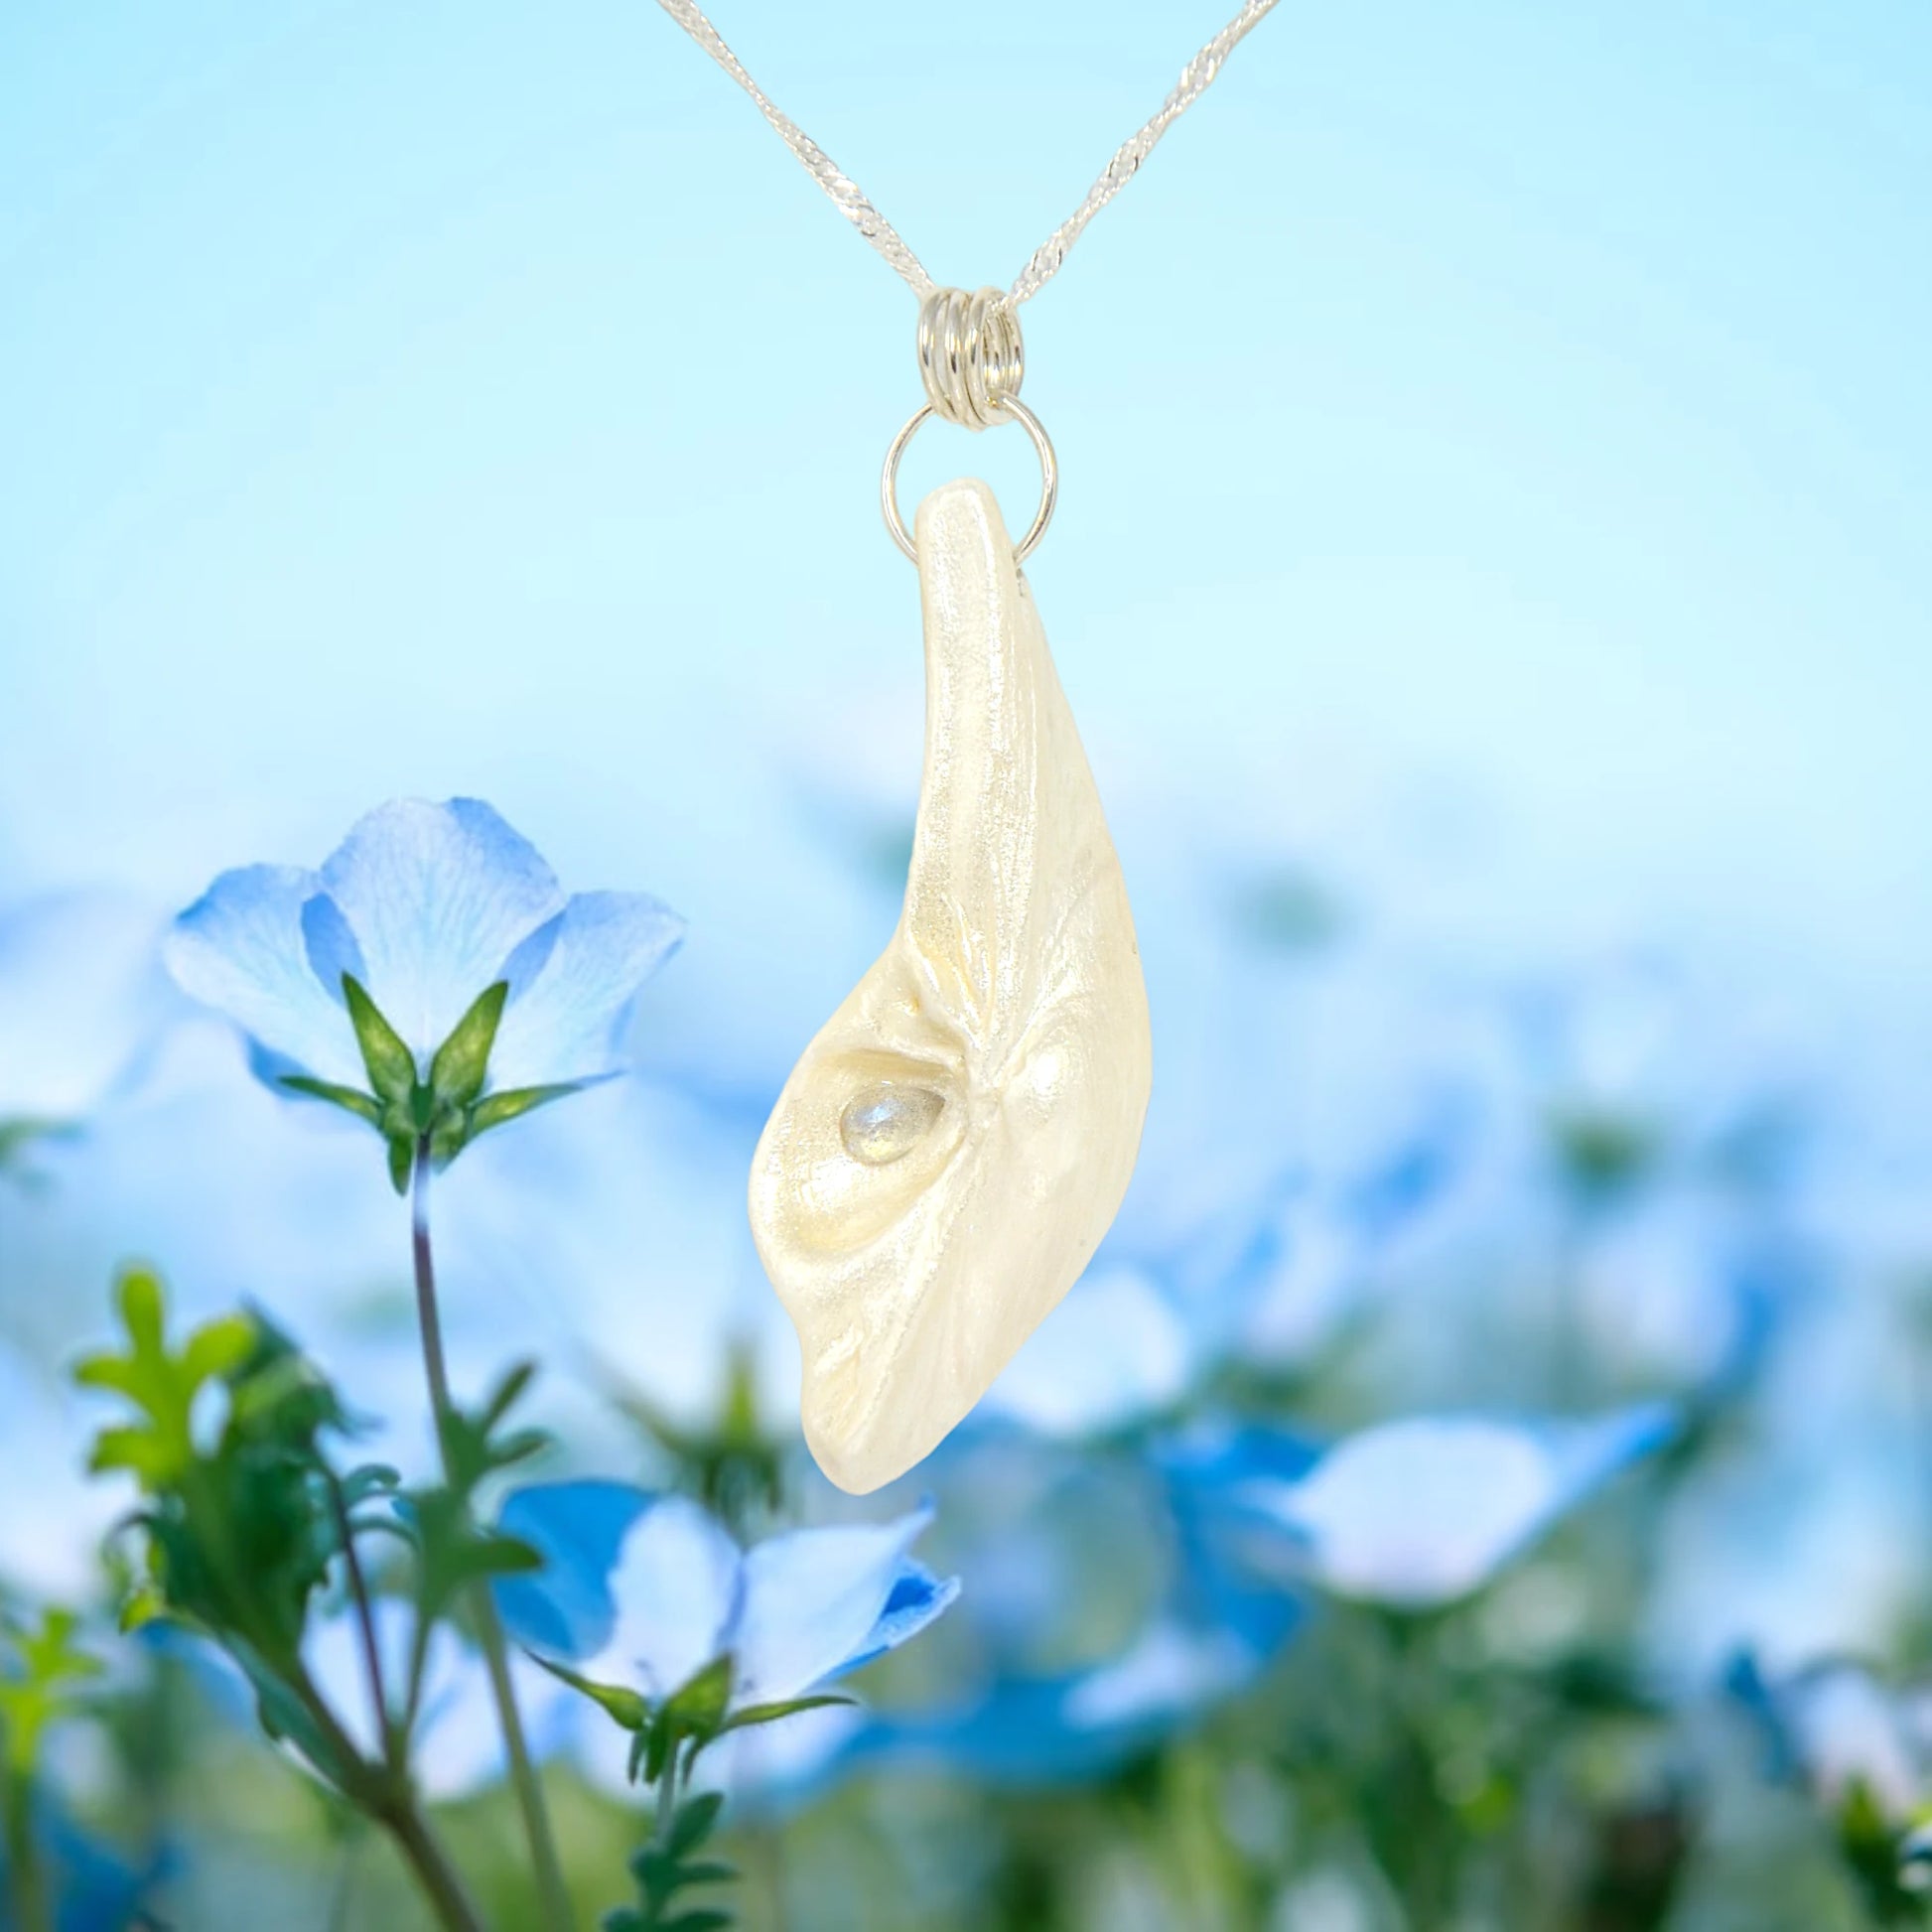 Cool Summer natural seashell pendant with tear drop shape rose cut labradorite gemstone.  Is shown hanging from a chain with a soft blue floral background.